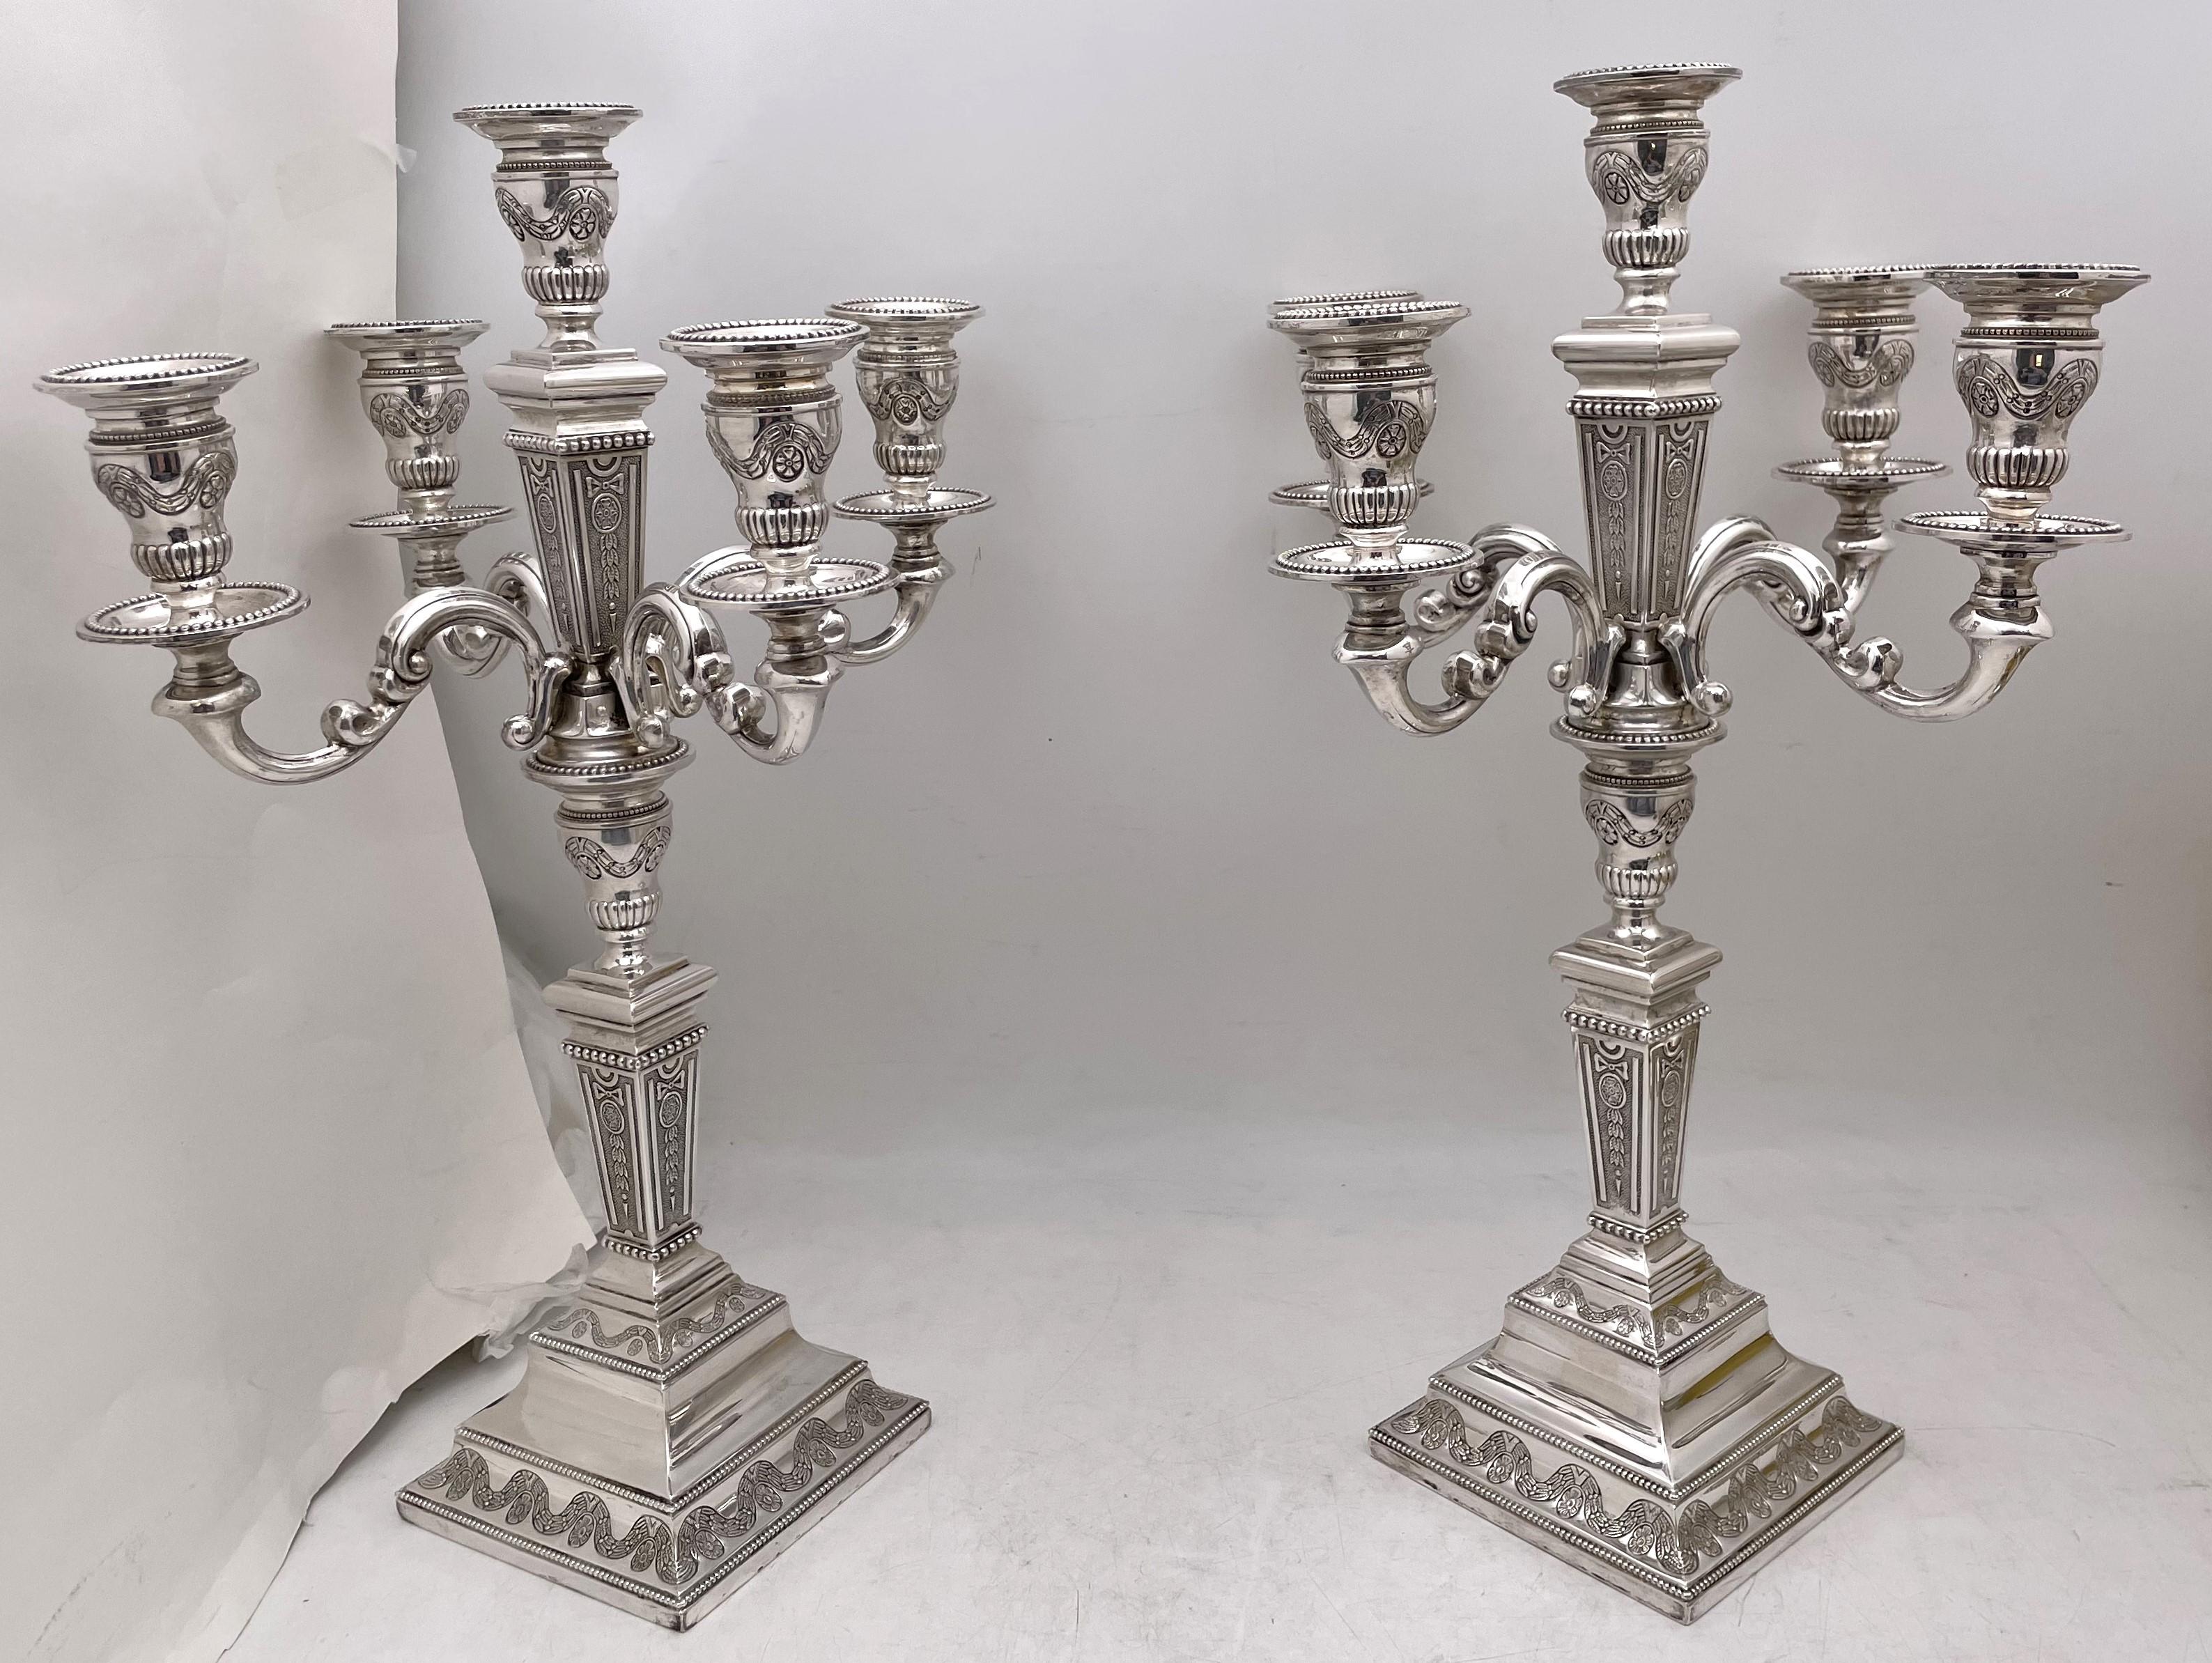 Pair of Portuguese 0.835 silver. 20th century pair of 5-light candelabra, beautifully adorned with floral, bows, and geometric motifs. They measure 16 1/3'' in height by 11'' arm to arm, weigh 76.3 troy ounces, and bear hallmarks as shown. 

Please